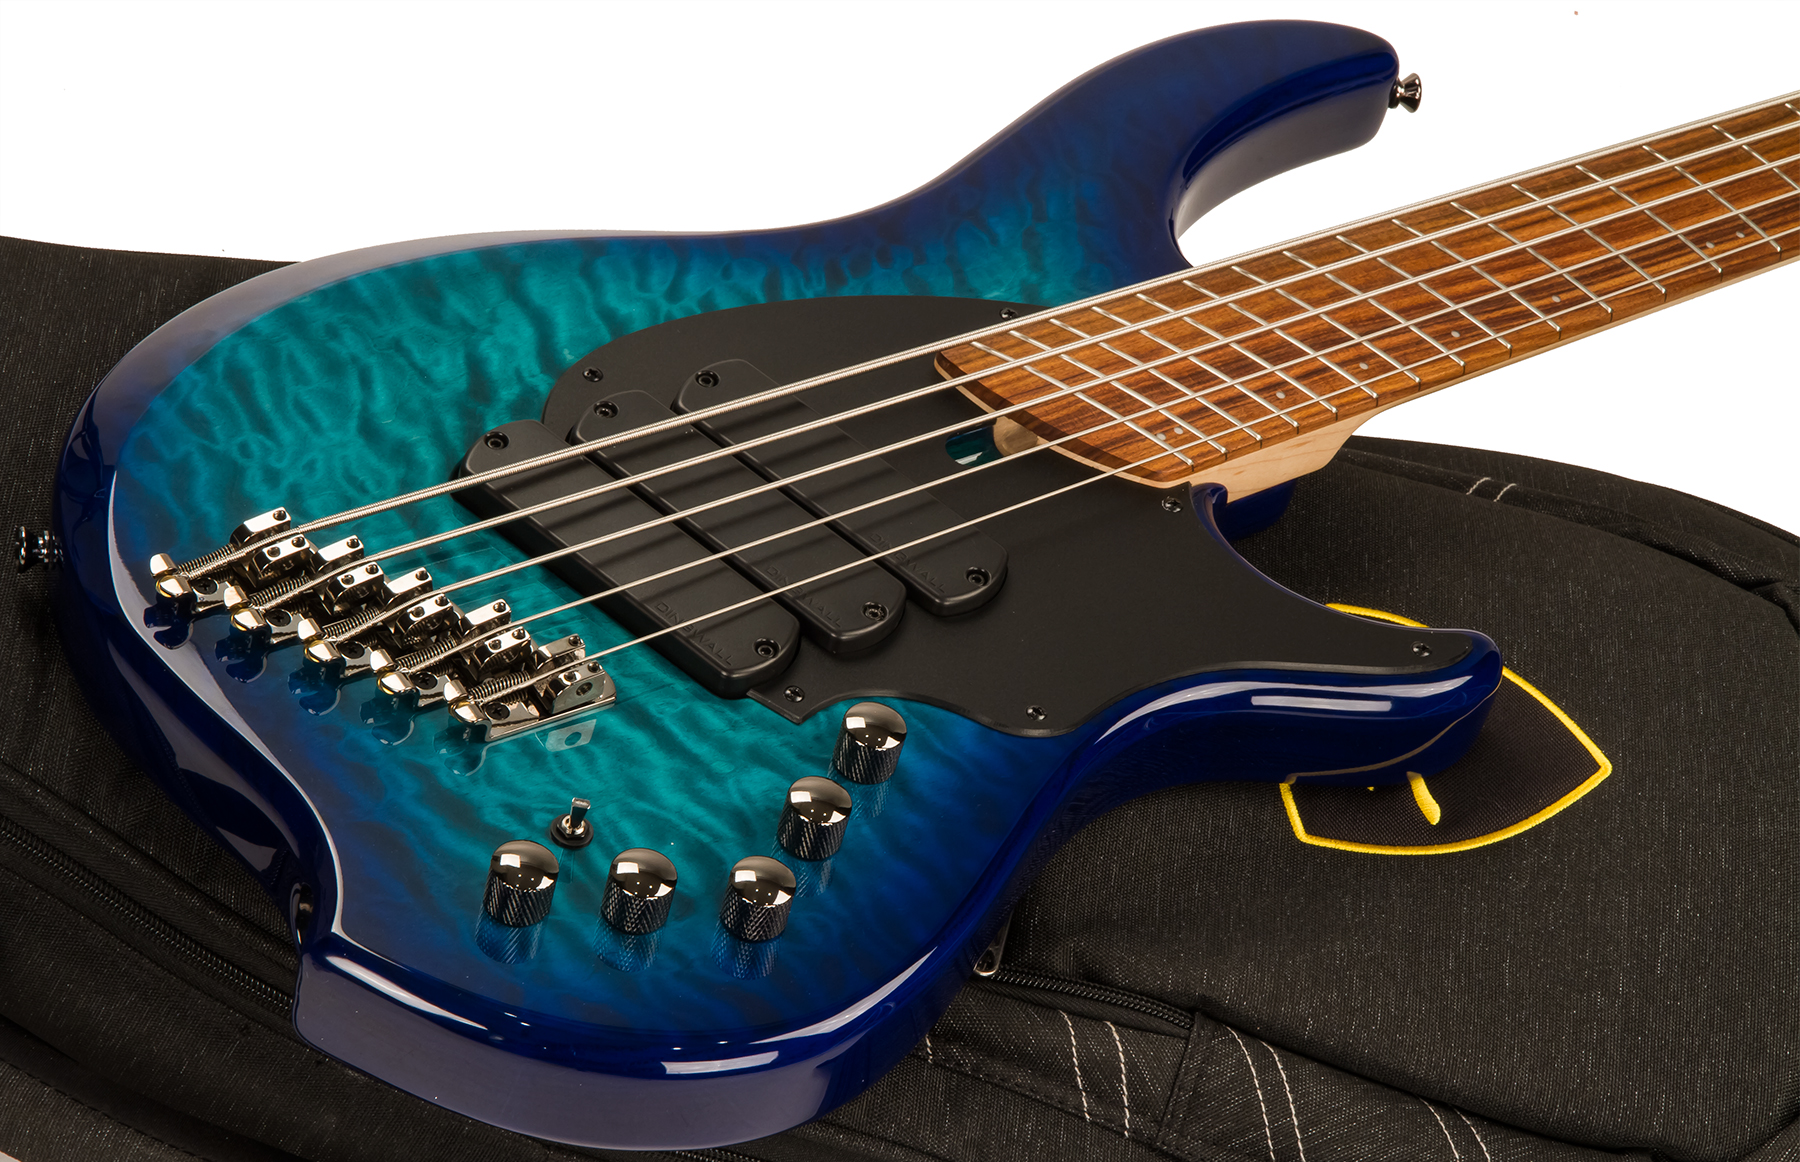 Dingwall Combustion 5 3-pickups Pf +housse - Whalepool Burst - Solid body electric bass - Variation 3